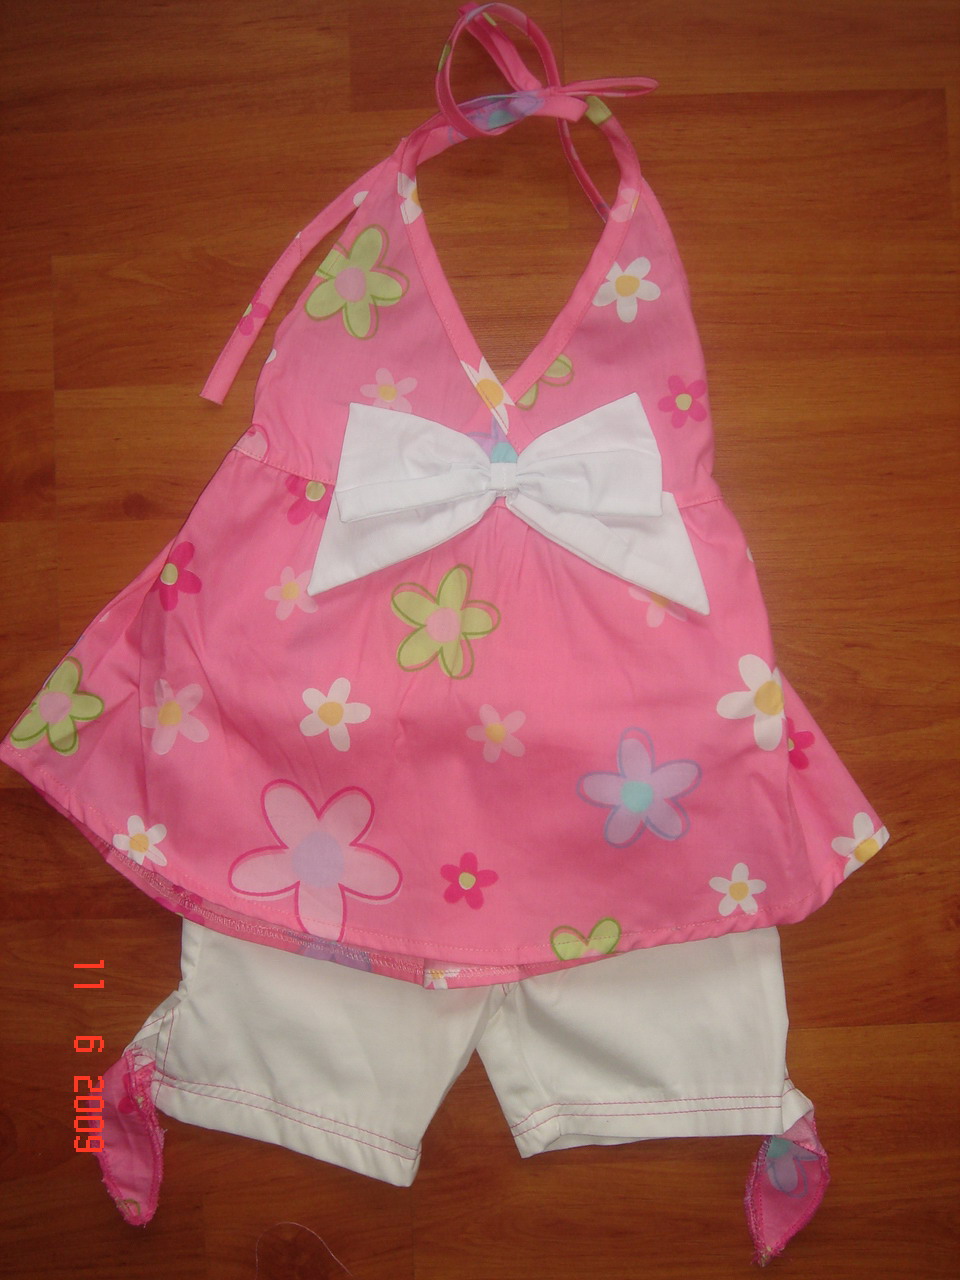 Adorable wear for your adorable little one: Sets